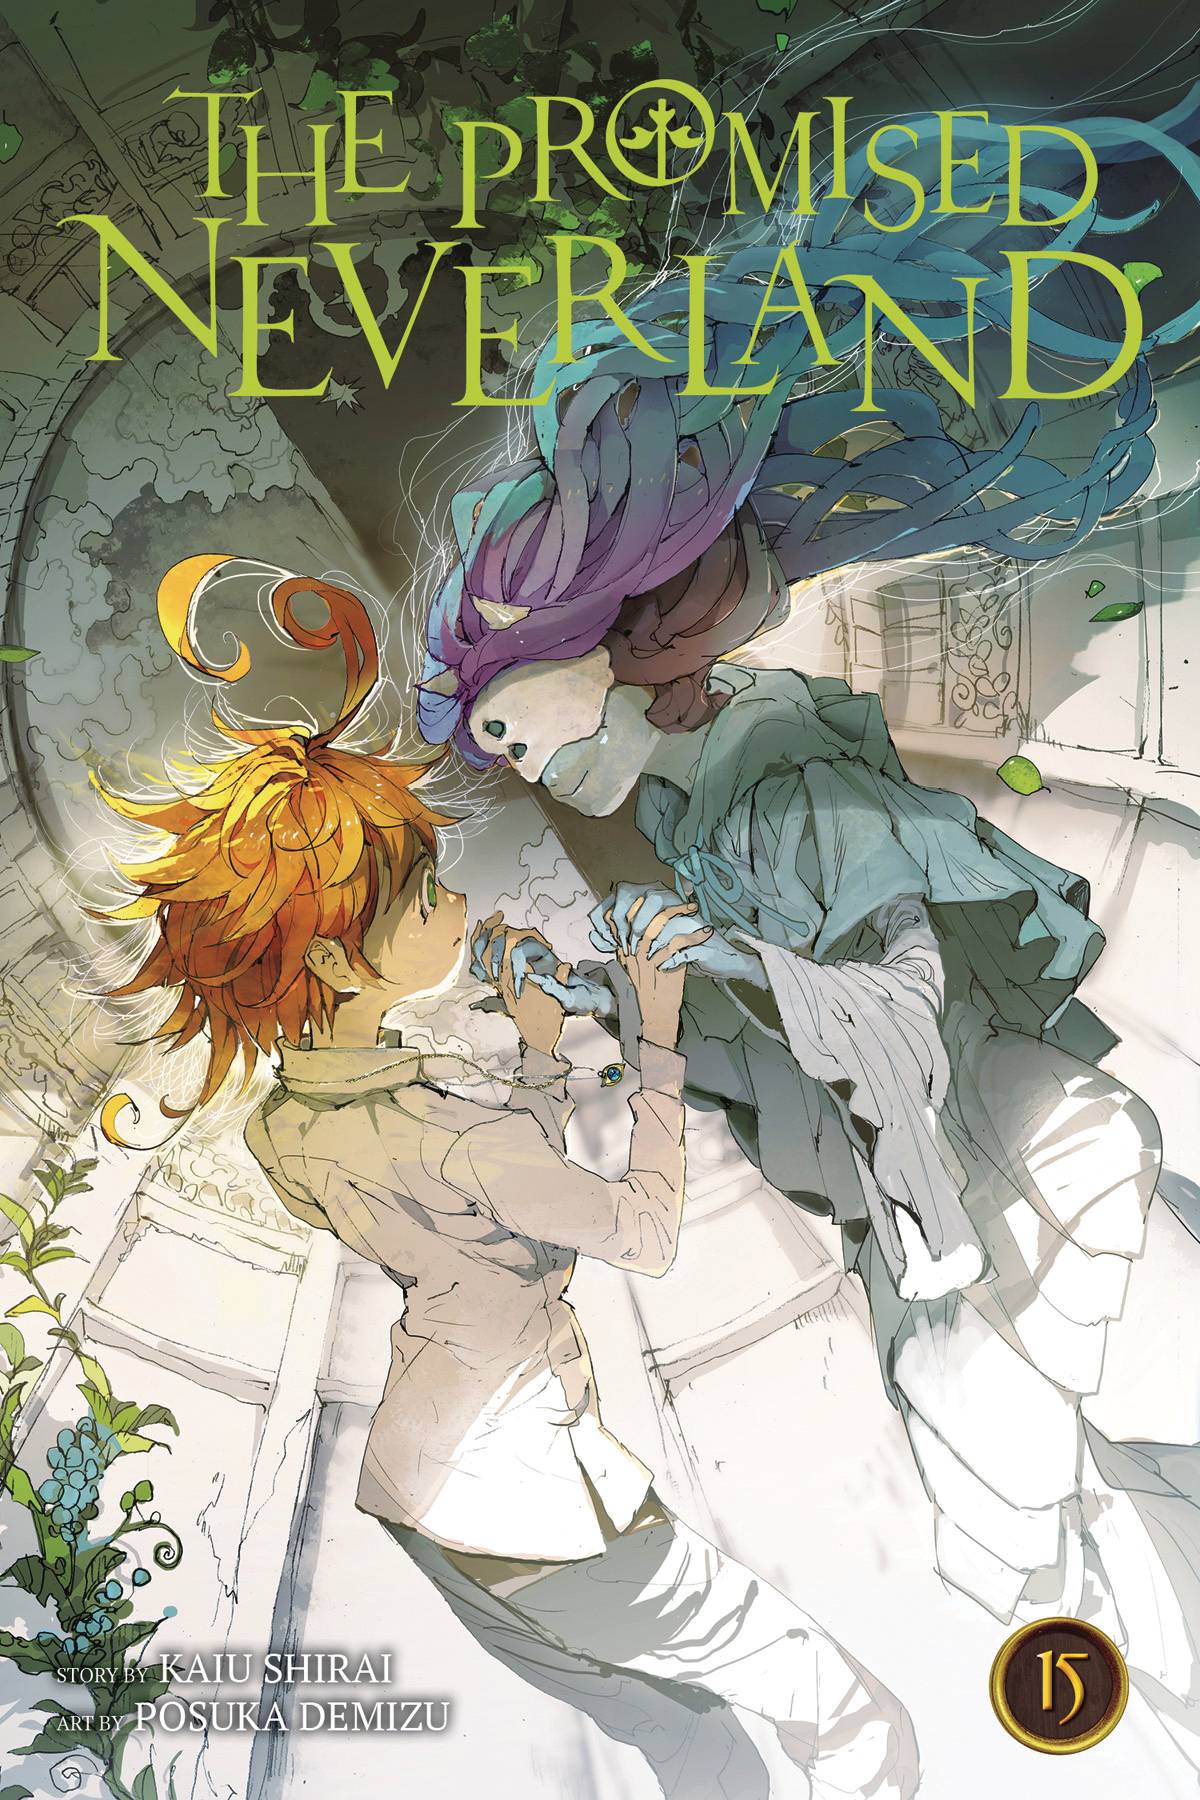 PROMISED NEVERLAND GN VOL 15